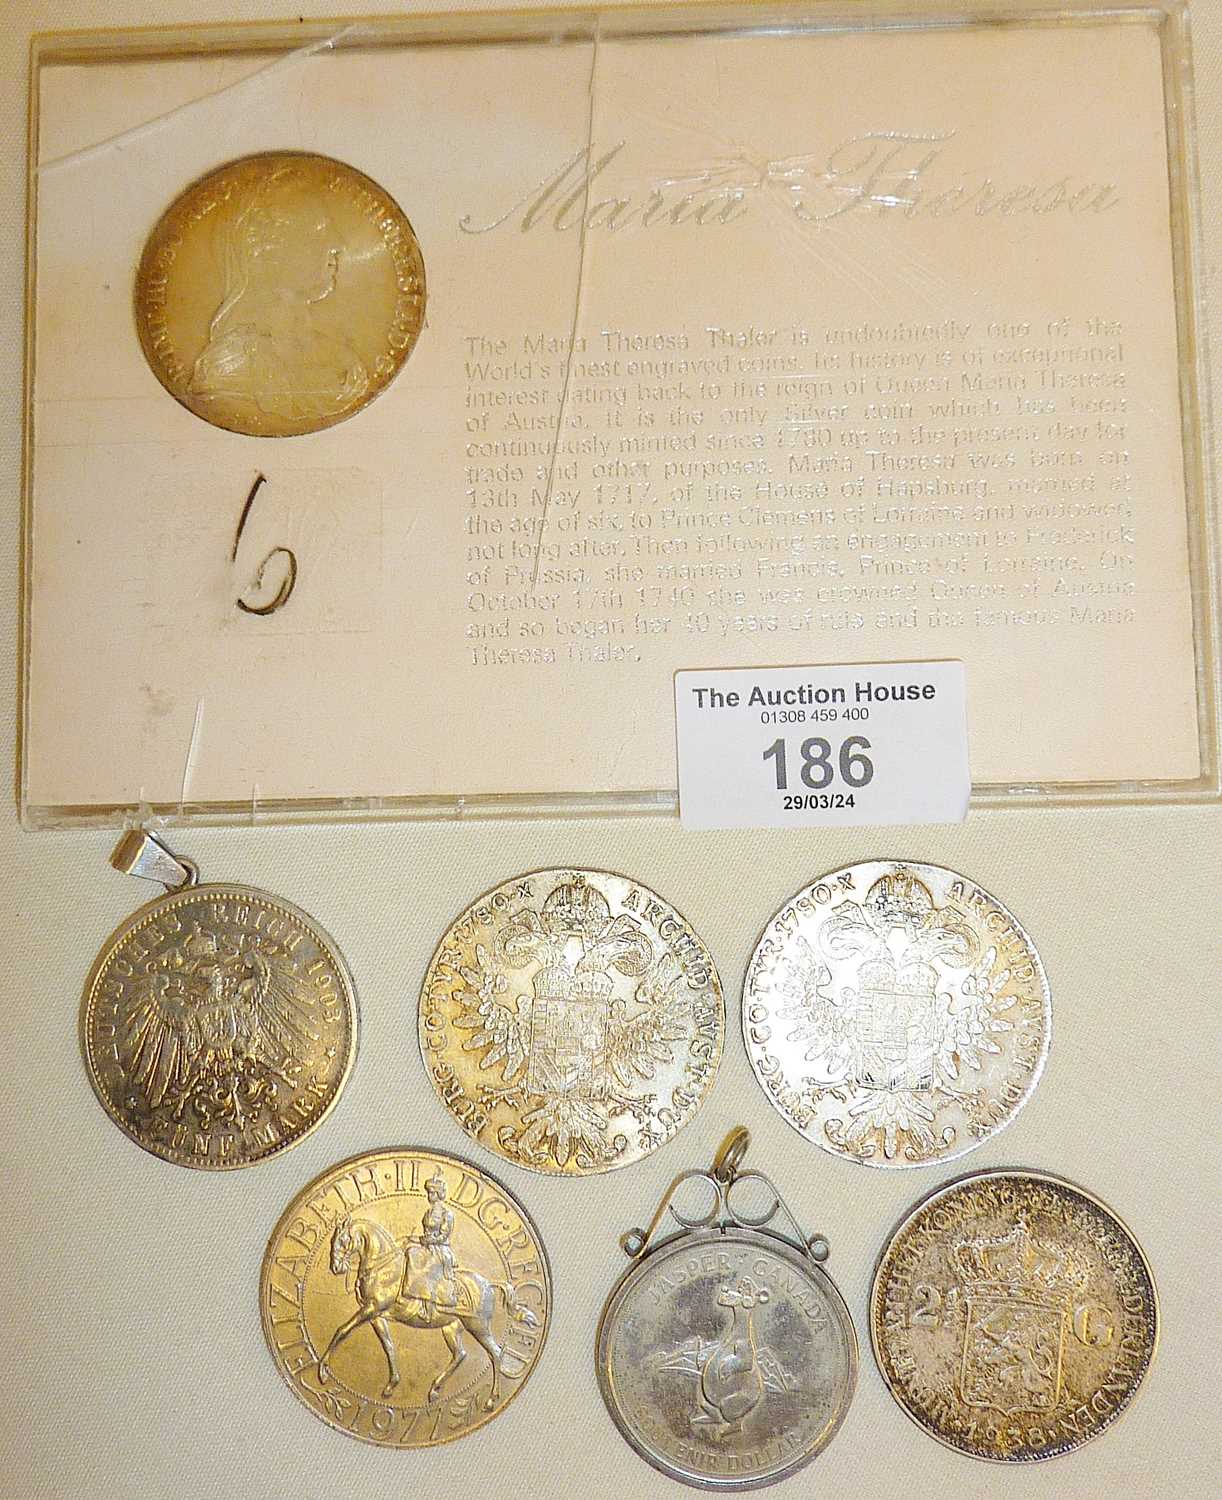 Three Maria Theresa Thaler silver coins and others, some silver and as medallions